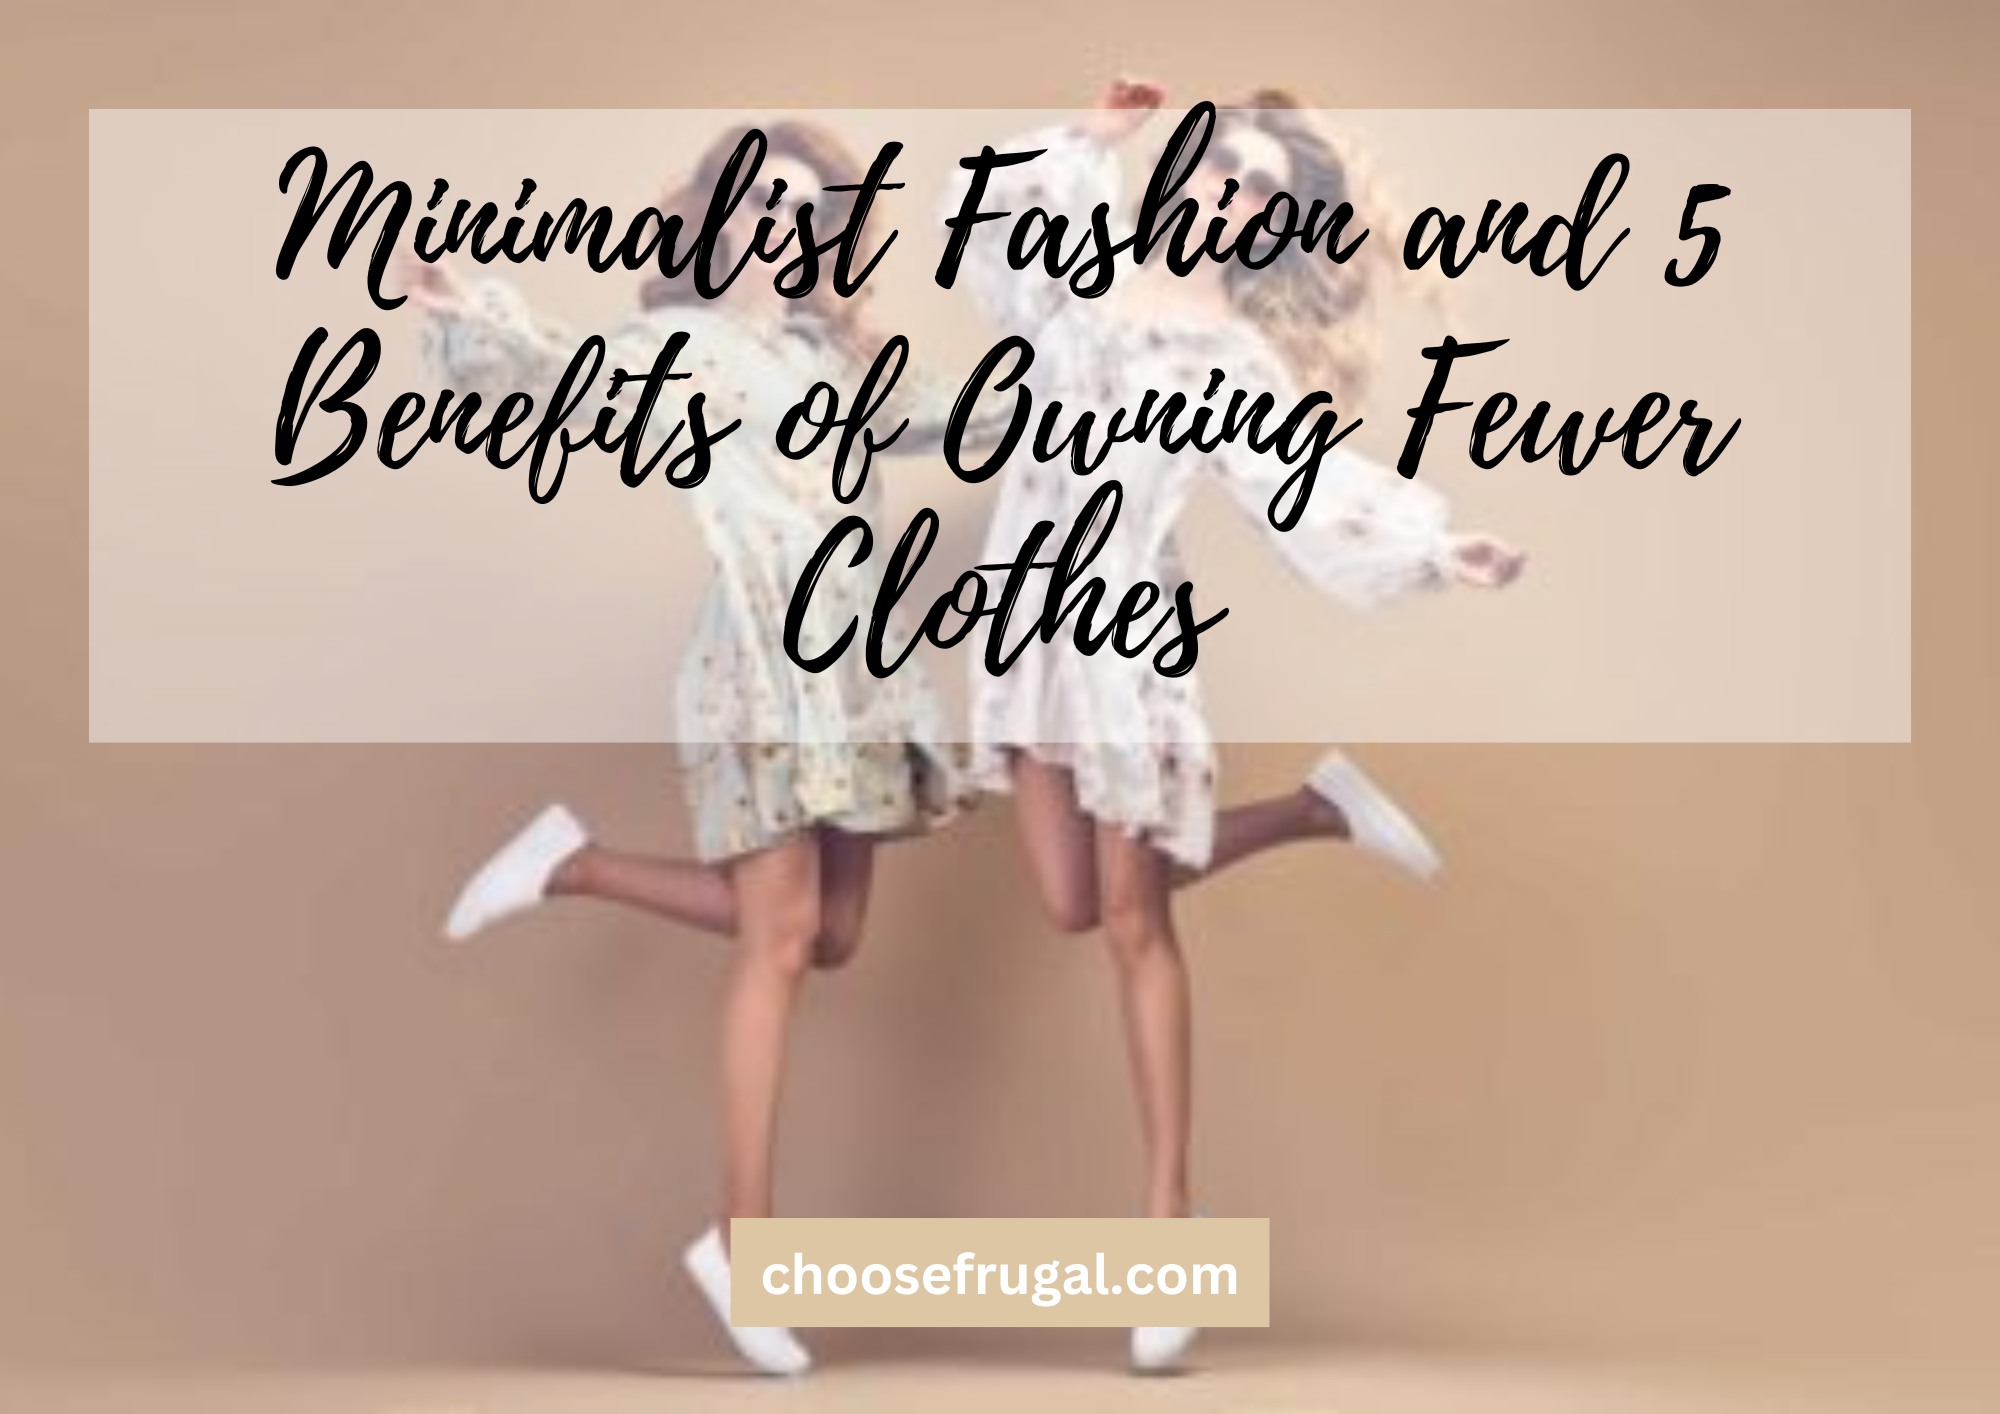 Minimalist Fashion and 5 Benefits of Owning Fewer Clothes. Two women in nice minimalist fashionable dresses.